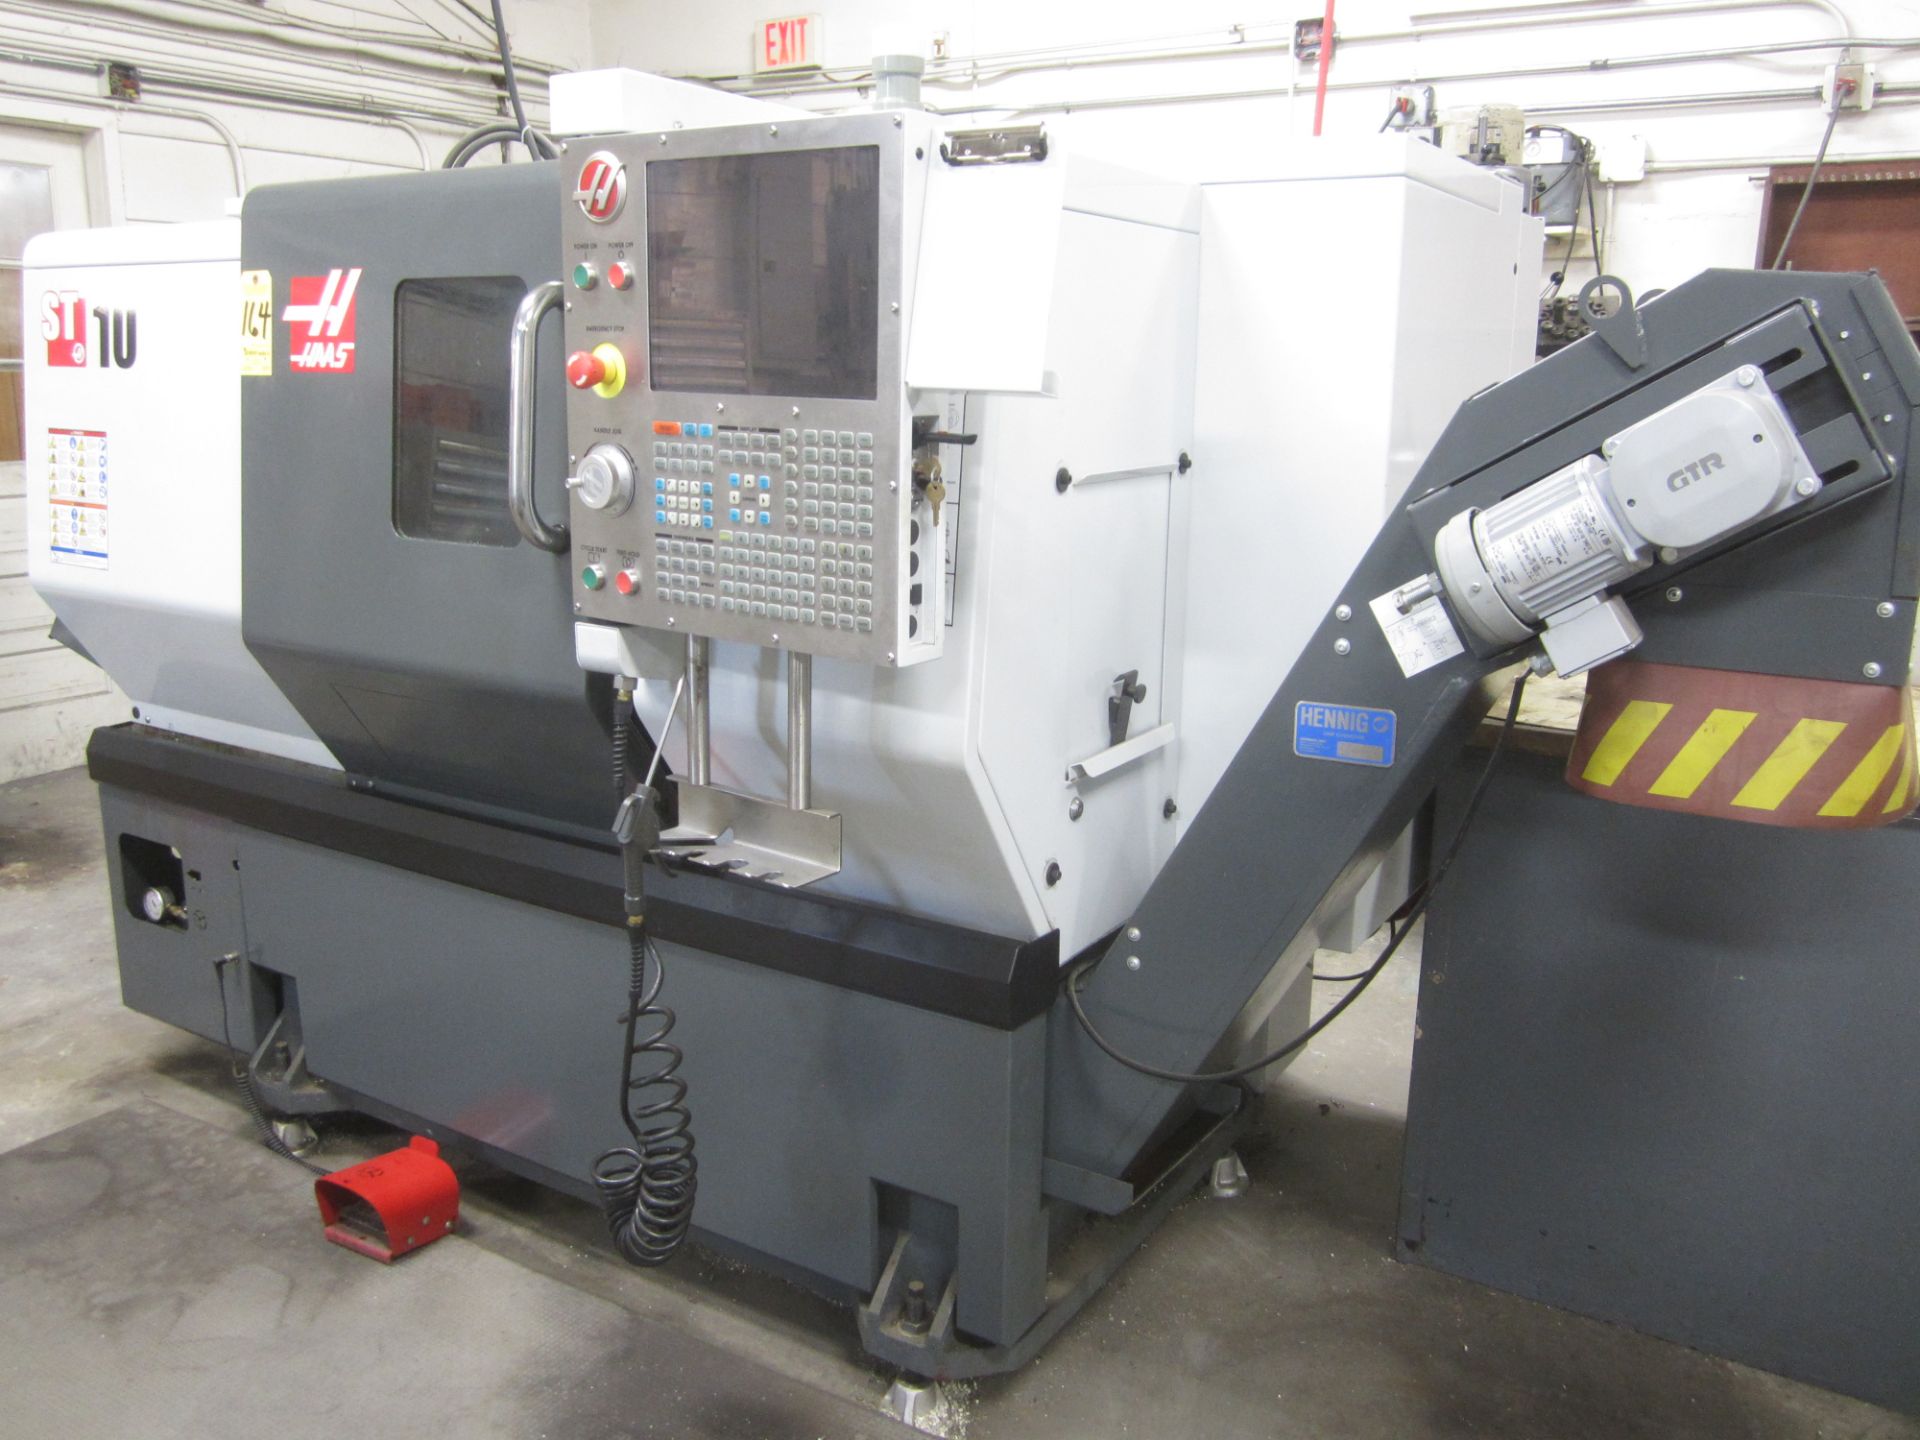 Haas ST10 CNC Turning Center, s/n 3103044, New 2015, Haas CNC Control, 1.75 In. Capacity, 15 HP,